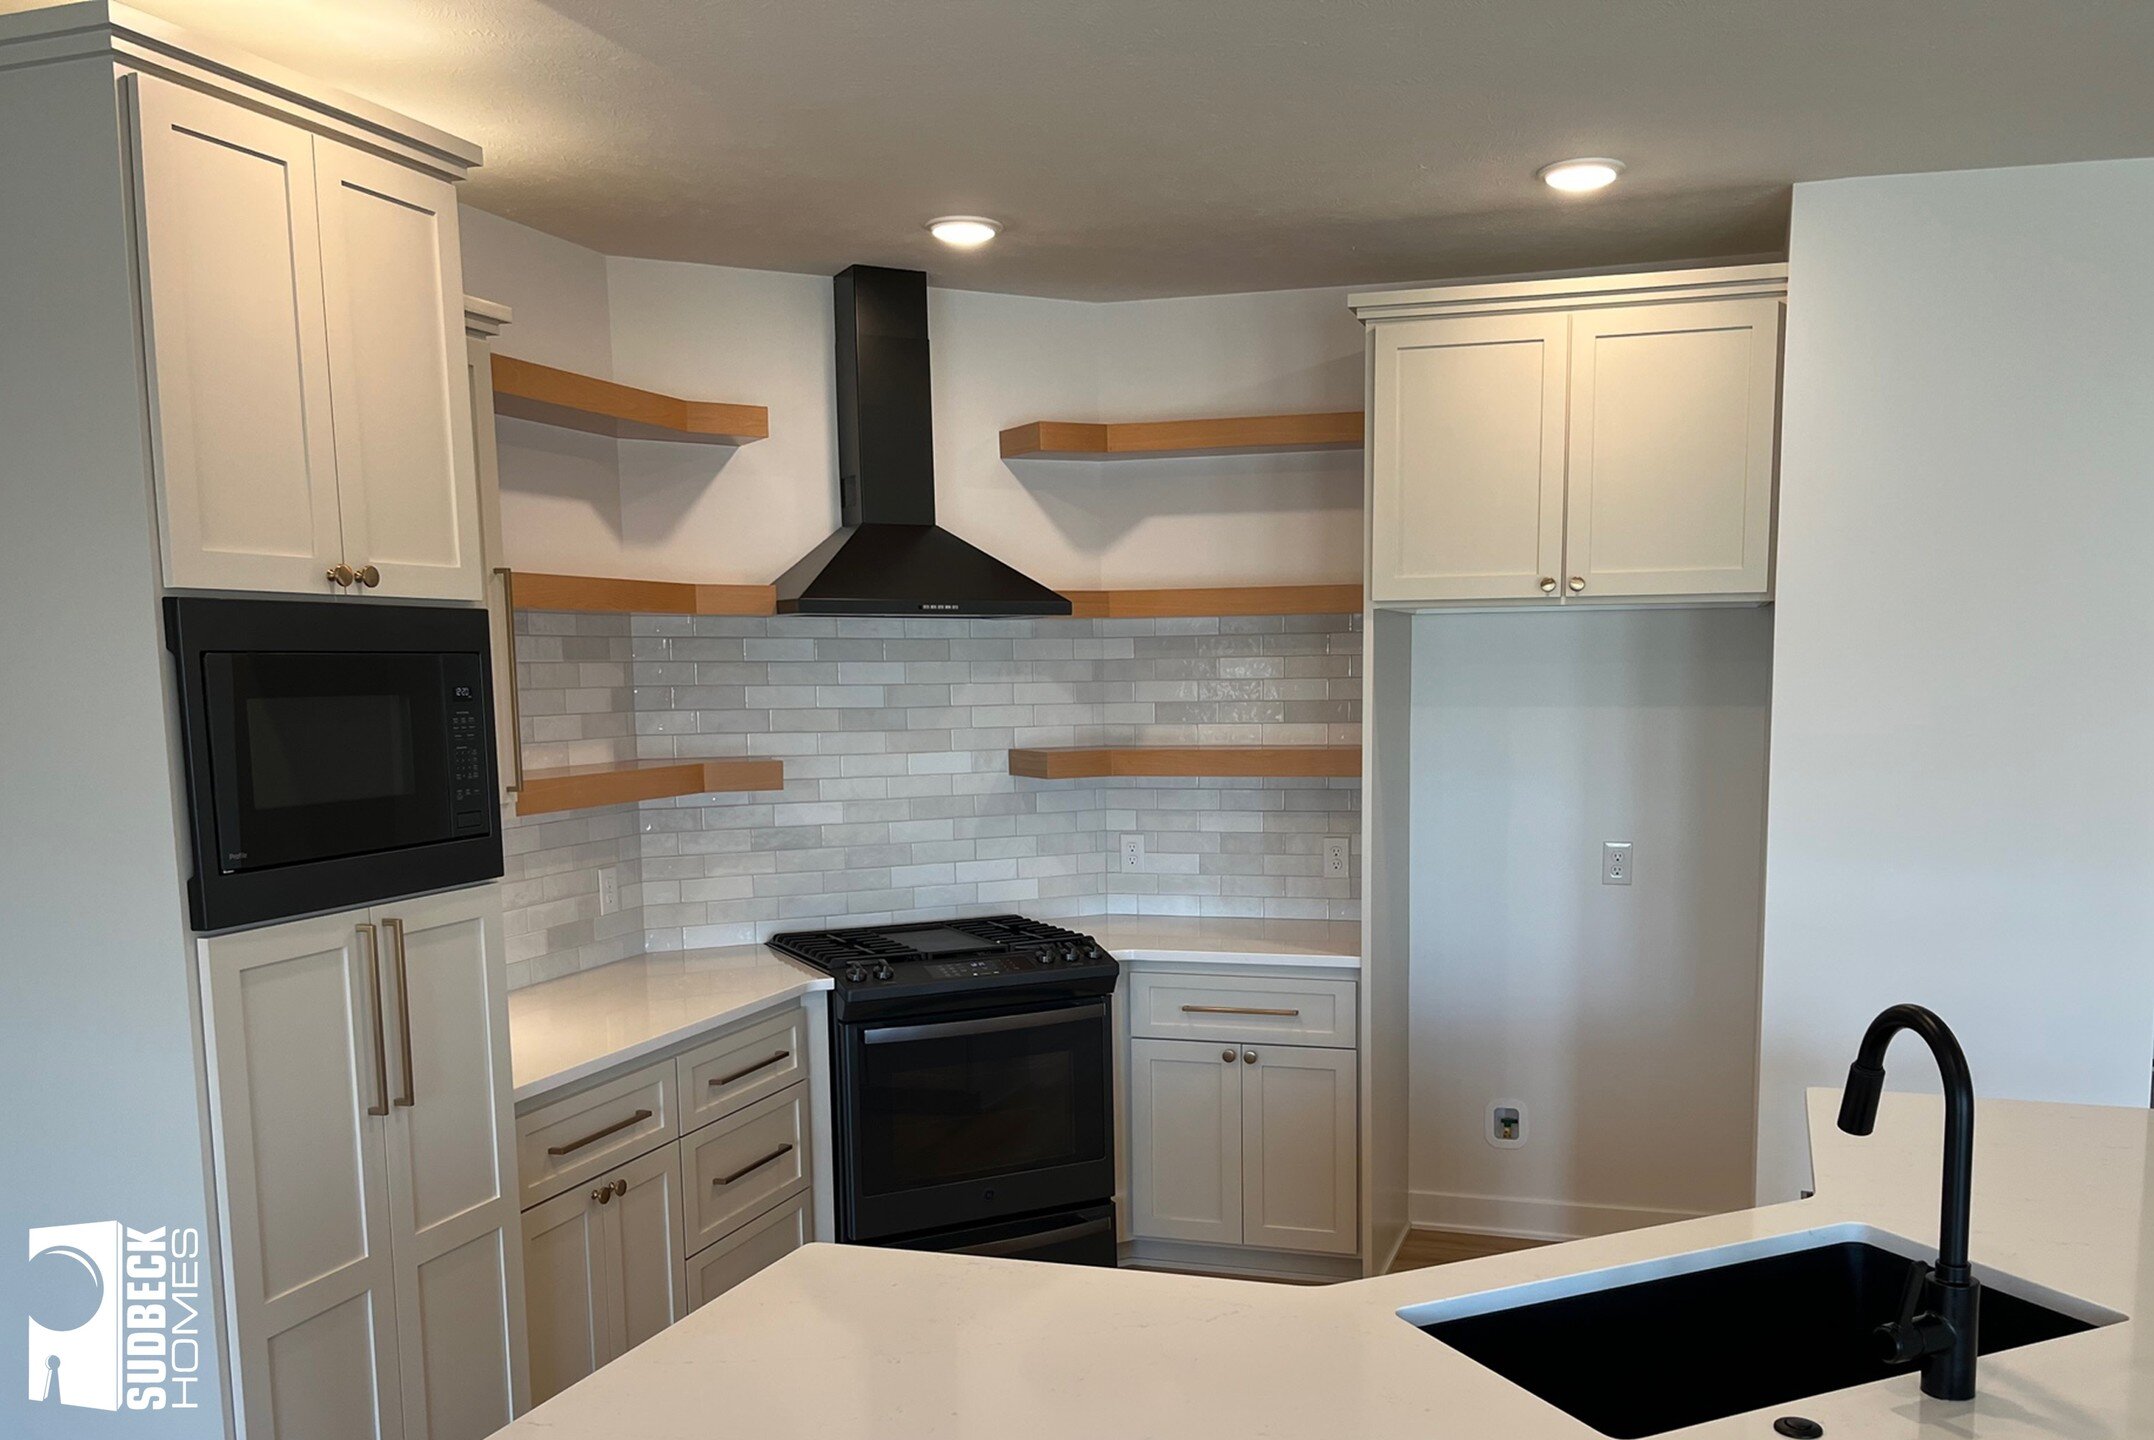 Love your space! Here at Sudbeck Homes we love and appreciate working with our customers to make their dream homes a reality! 

Contact us through our website for more information!

#SudbeckHomes #newhomes #Nebraska #homes4sale #kitchen #appliances #